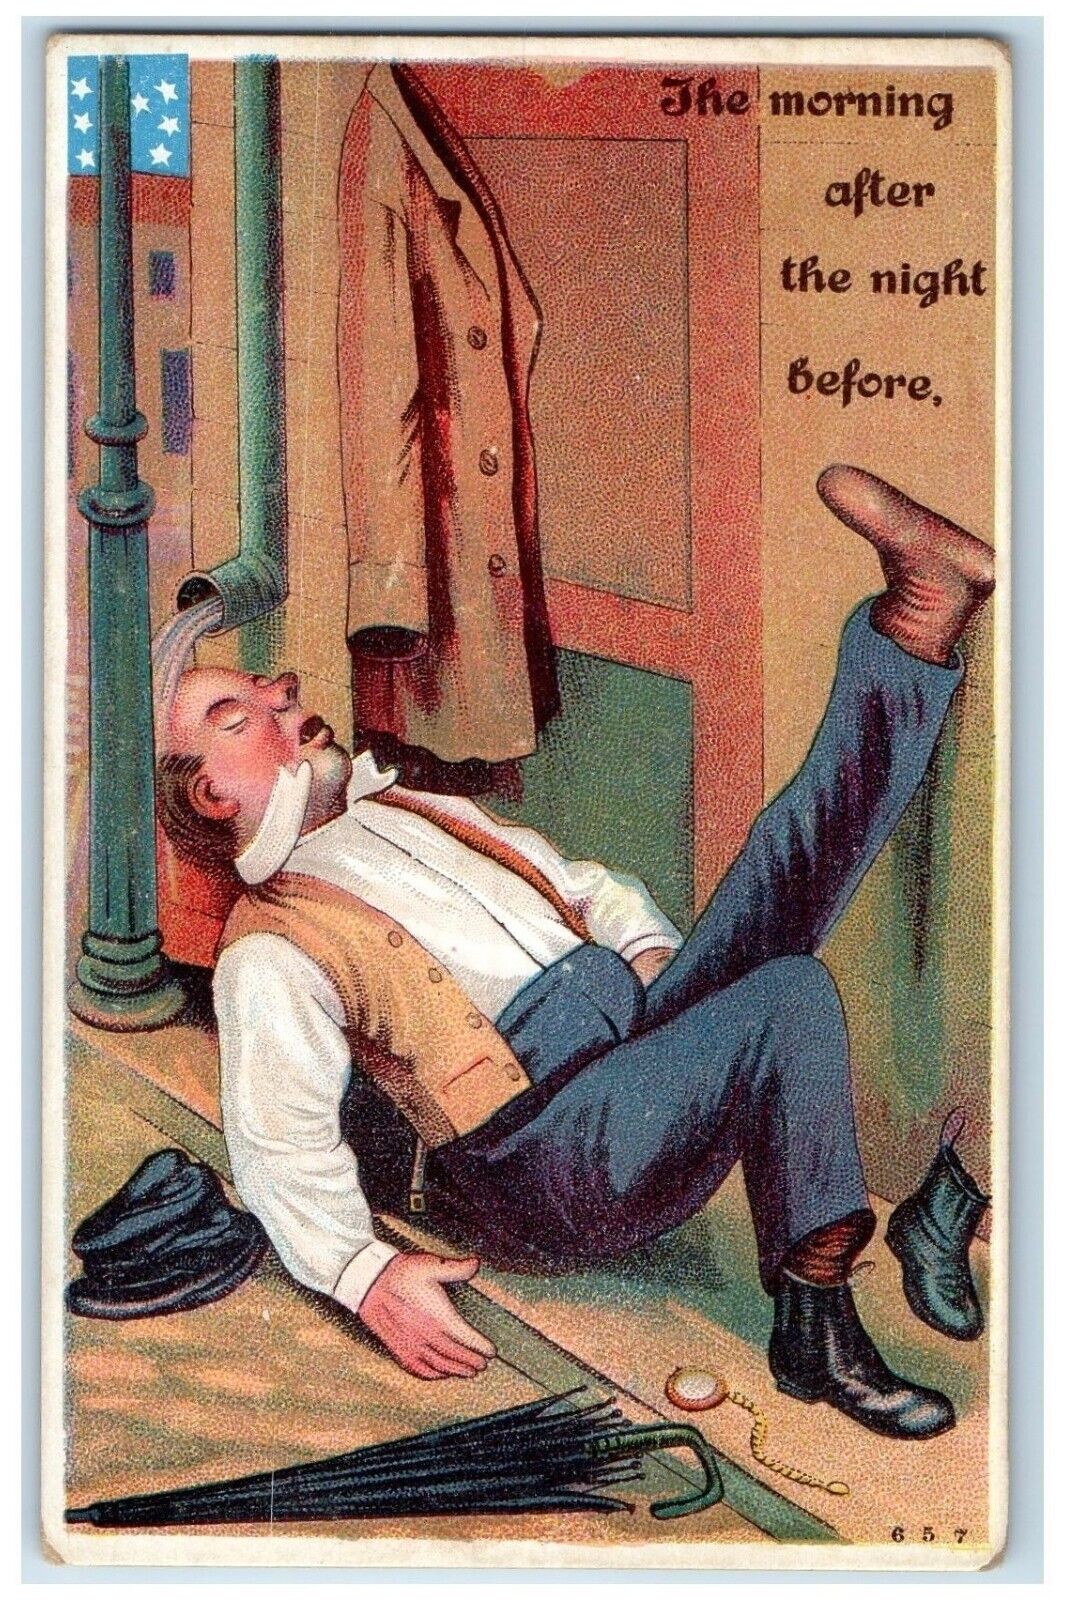 c1910's Drunk Man Sleeping The Morning After The Night Before Embossed Postcard